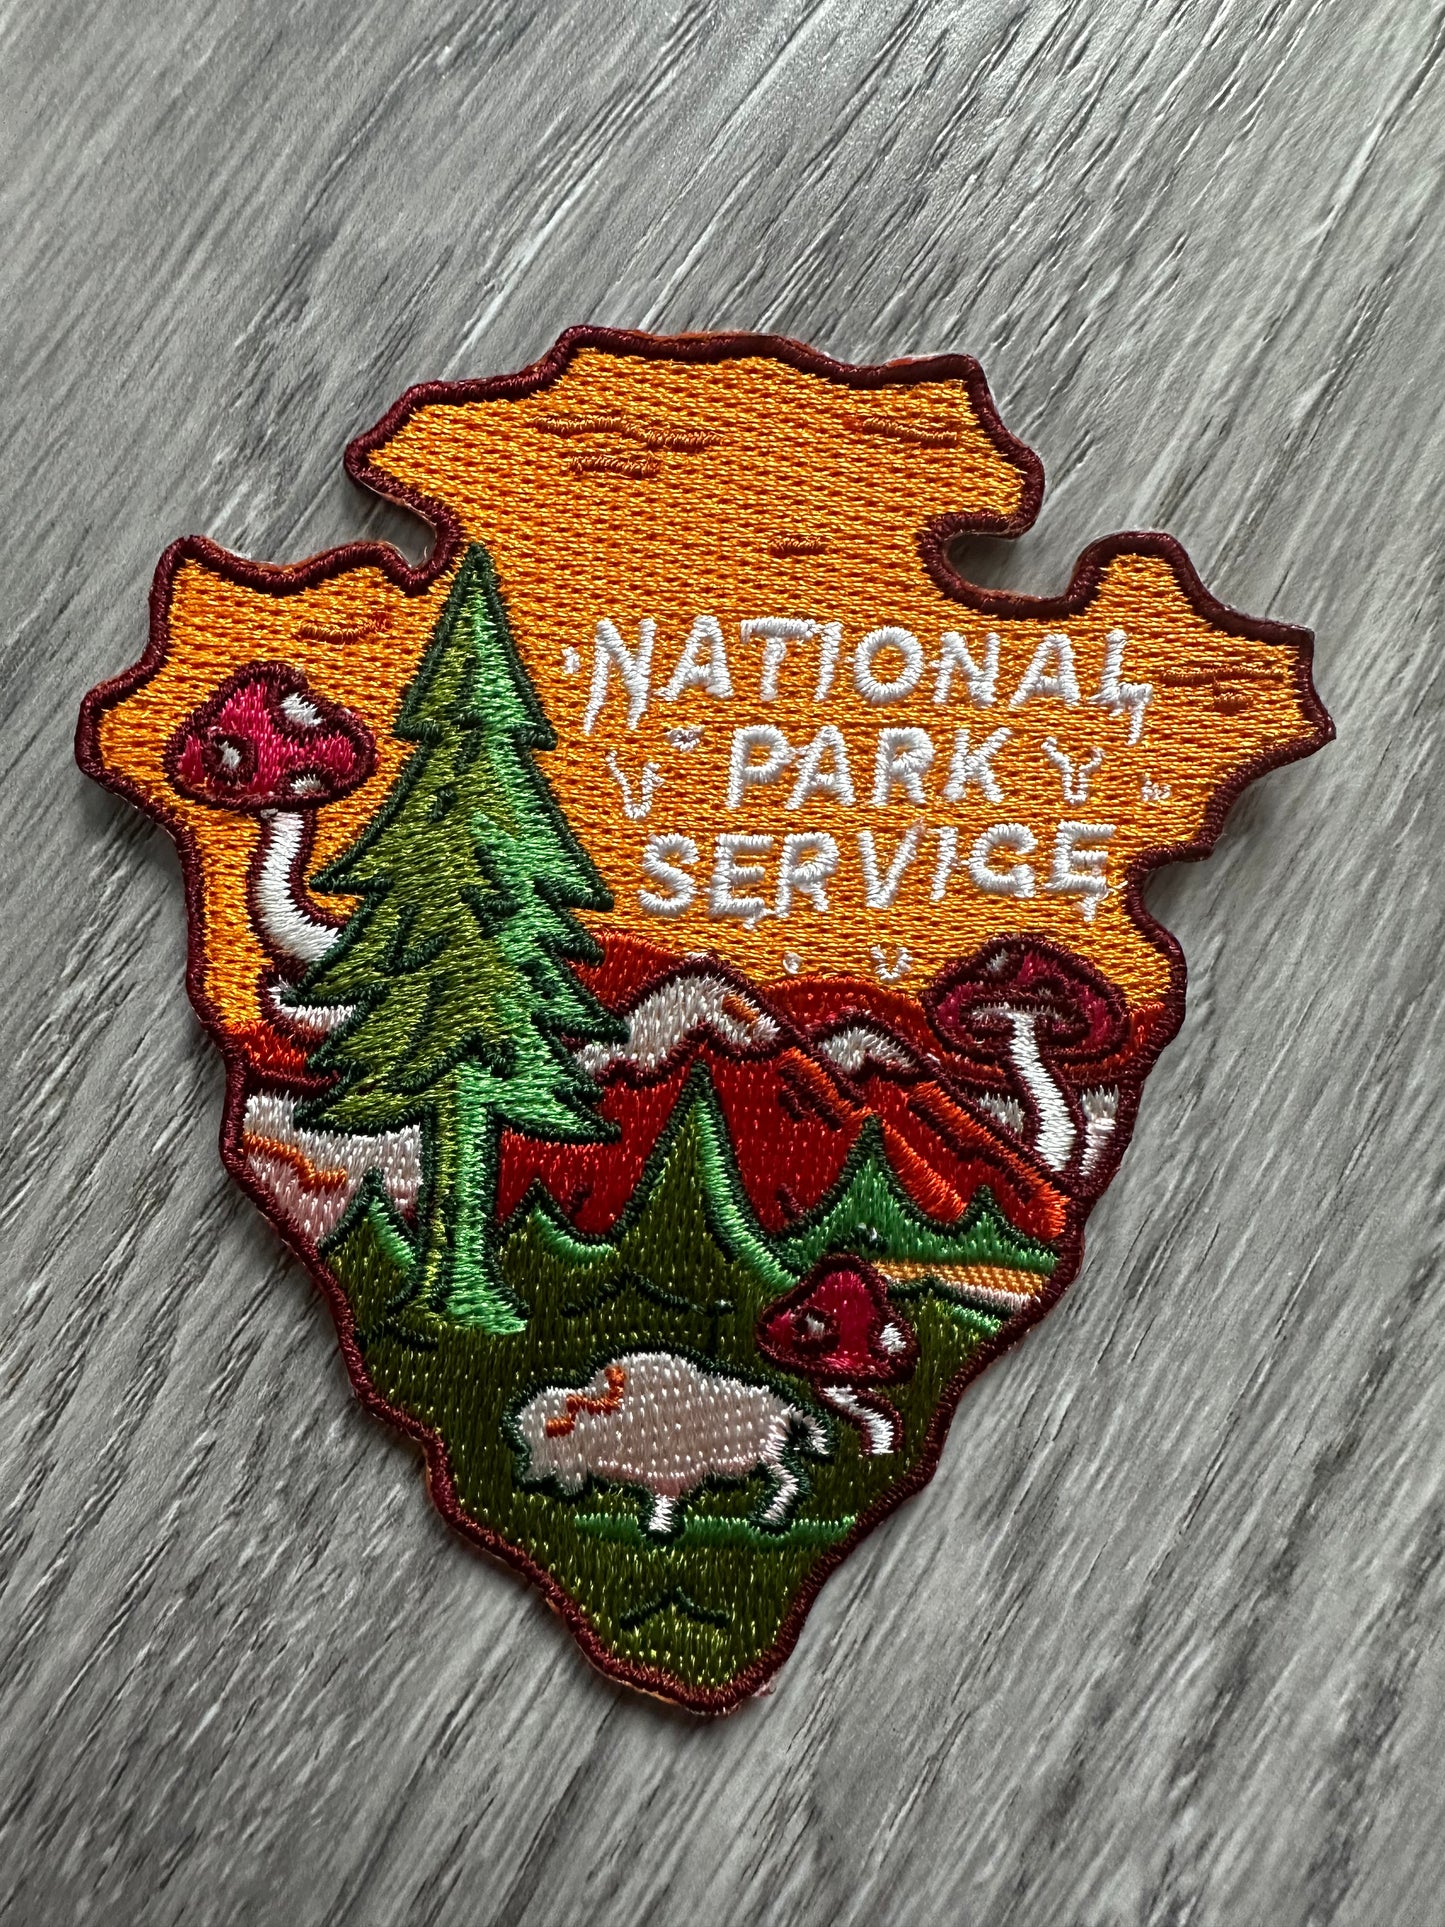 National Park Services State Parks Trippy 3.5” Iron on/ Sew On Embroidered